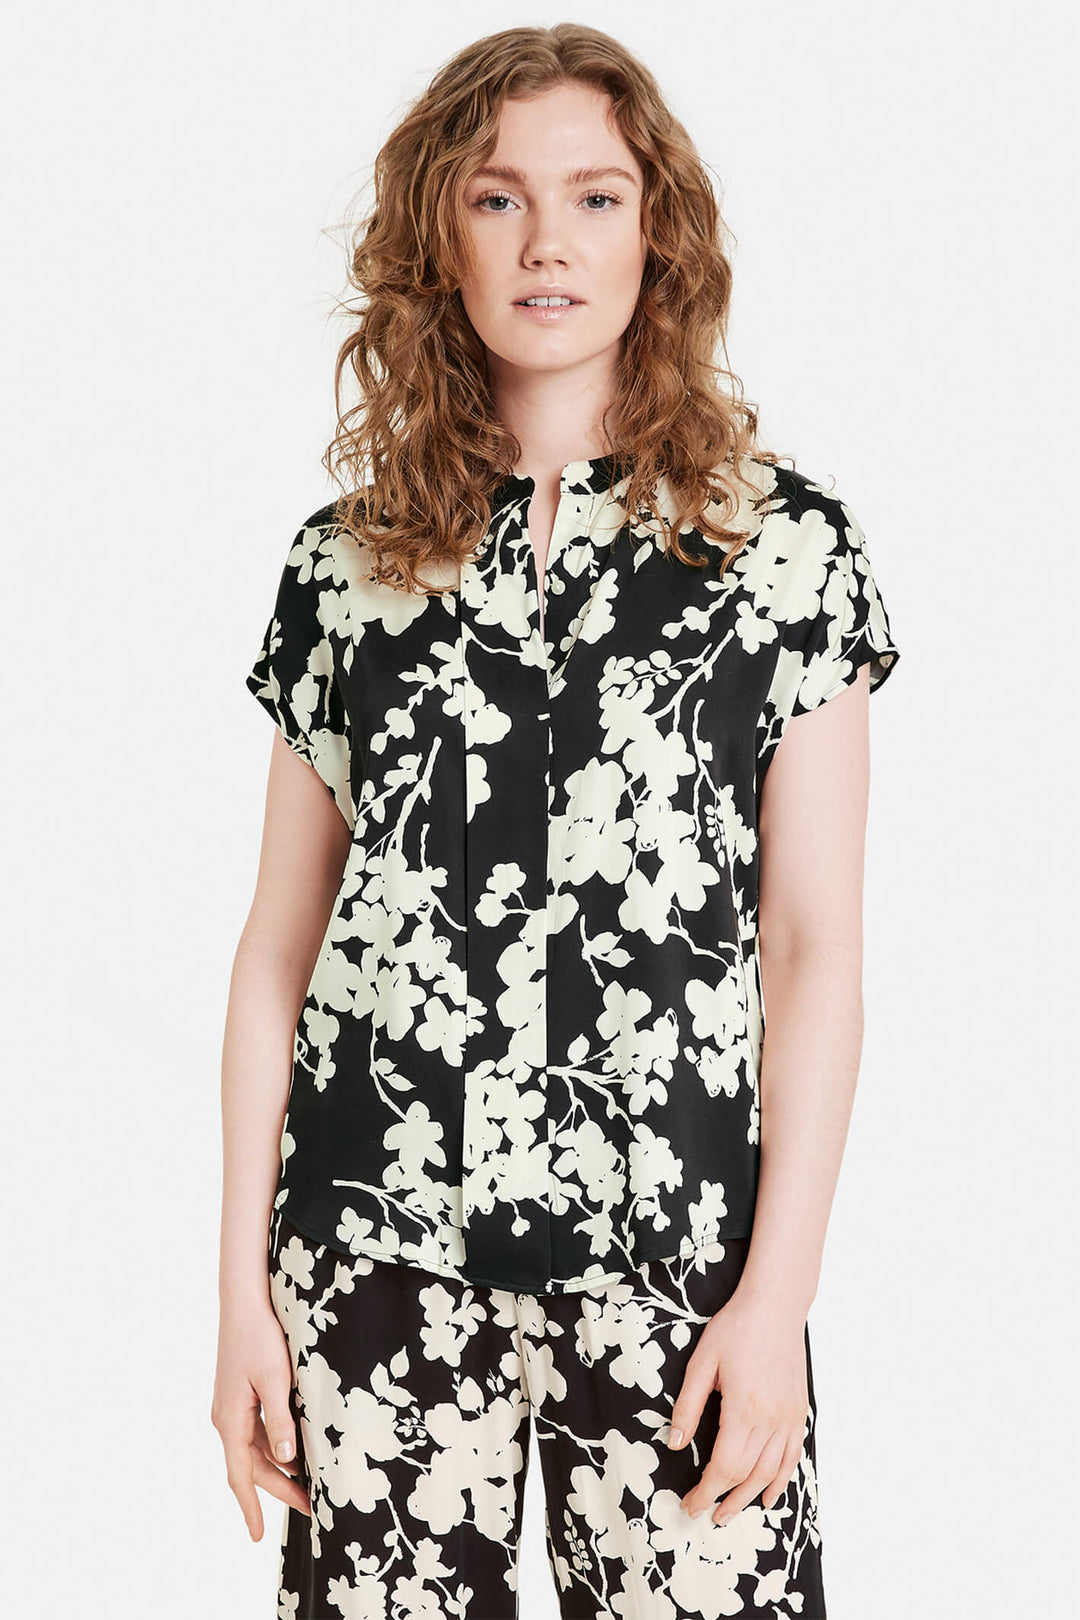 Taifun 360317 Black Blossom Patterned Blouse - Experience Boutique